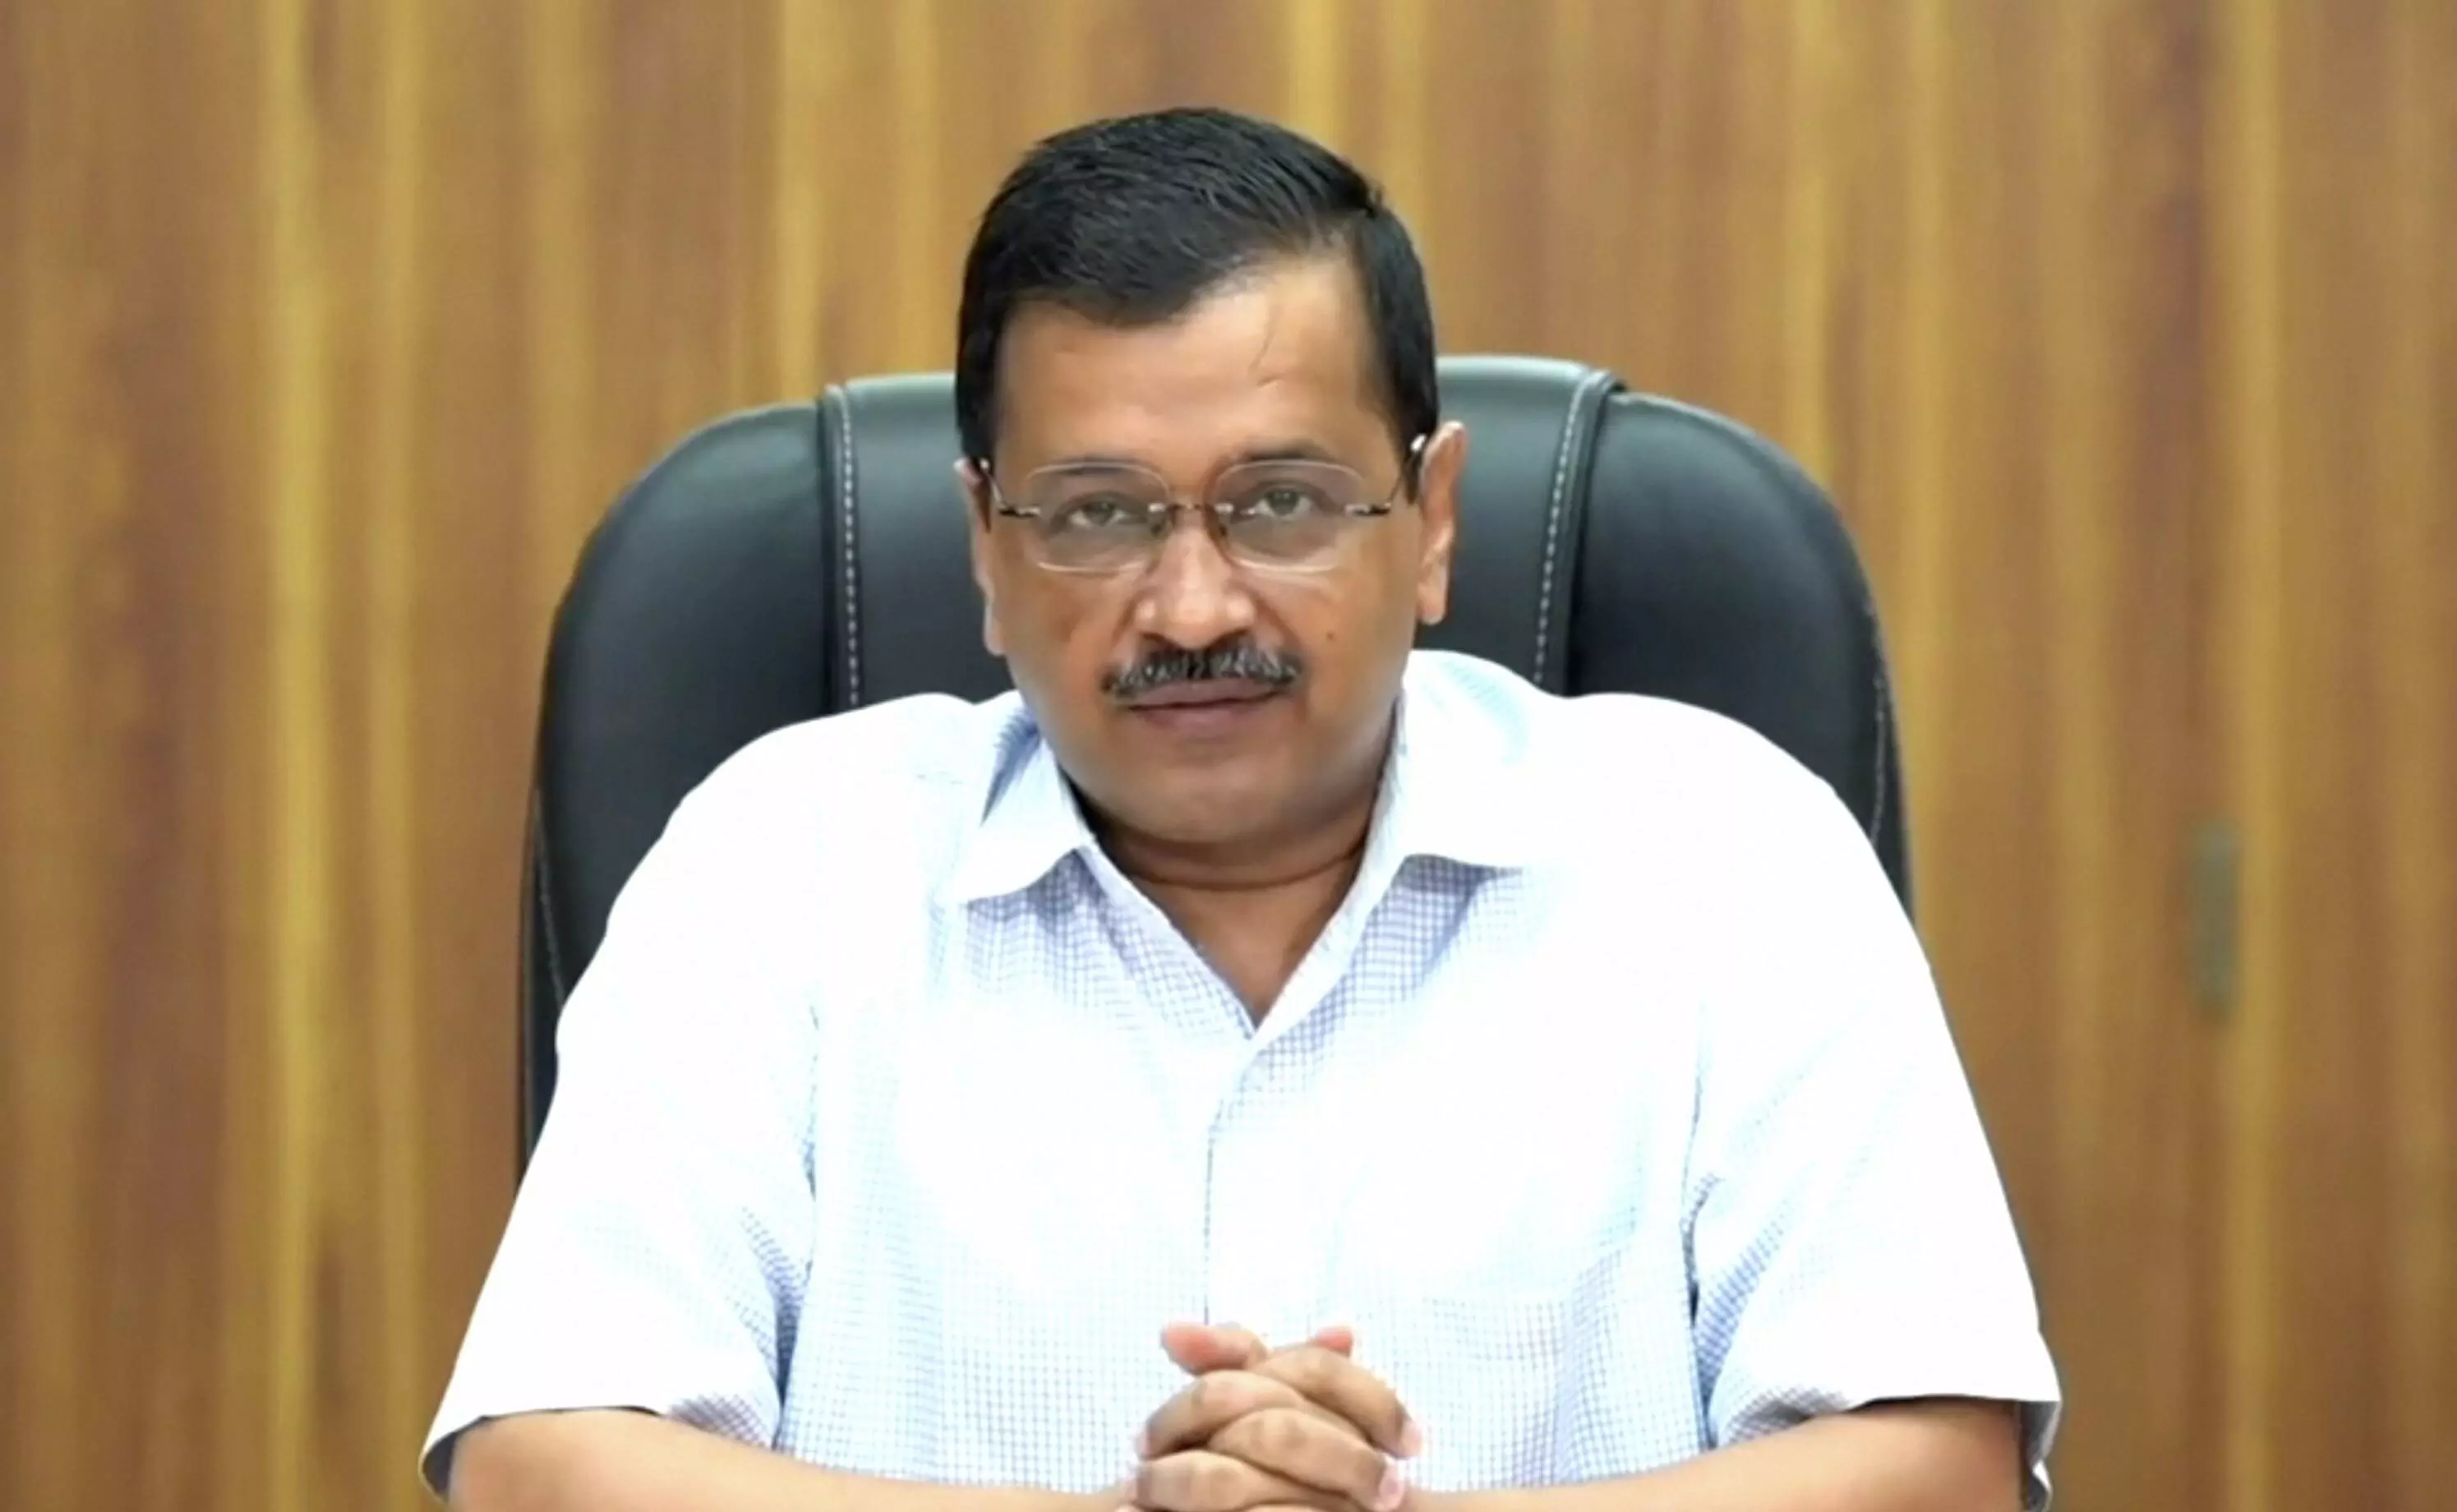 Ordinance on services matter was brought as money power, ED, CBI threat failed in Delhi: Kejriwal